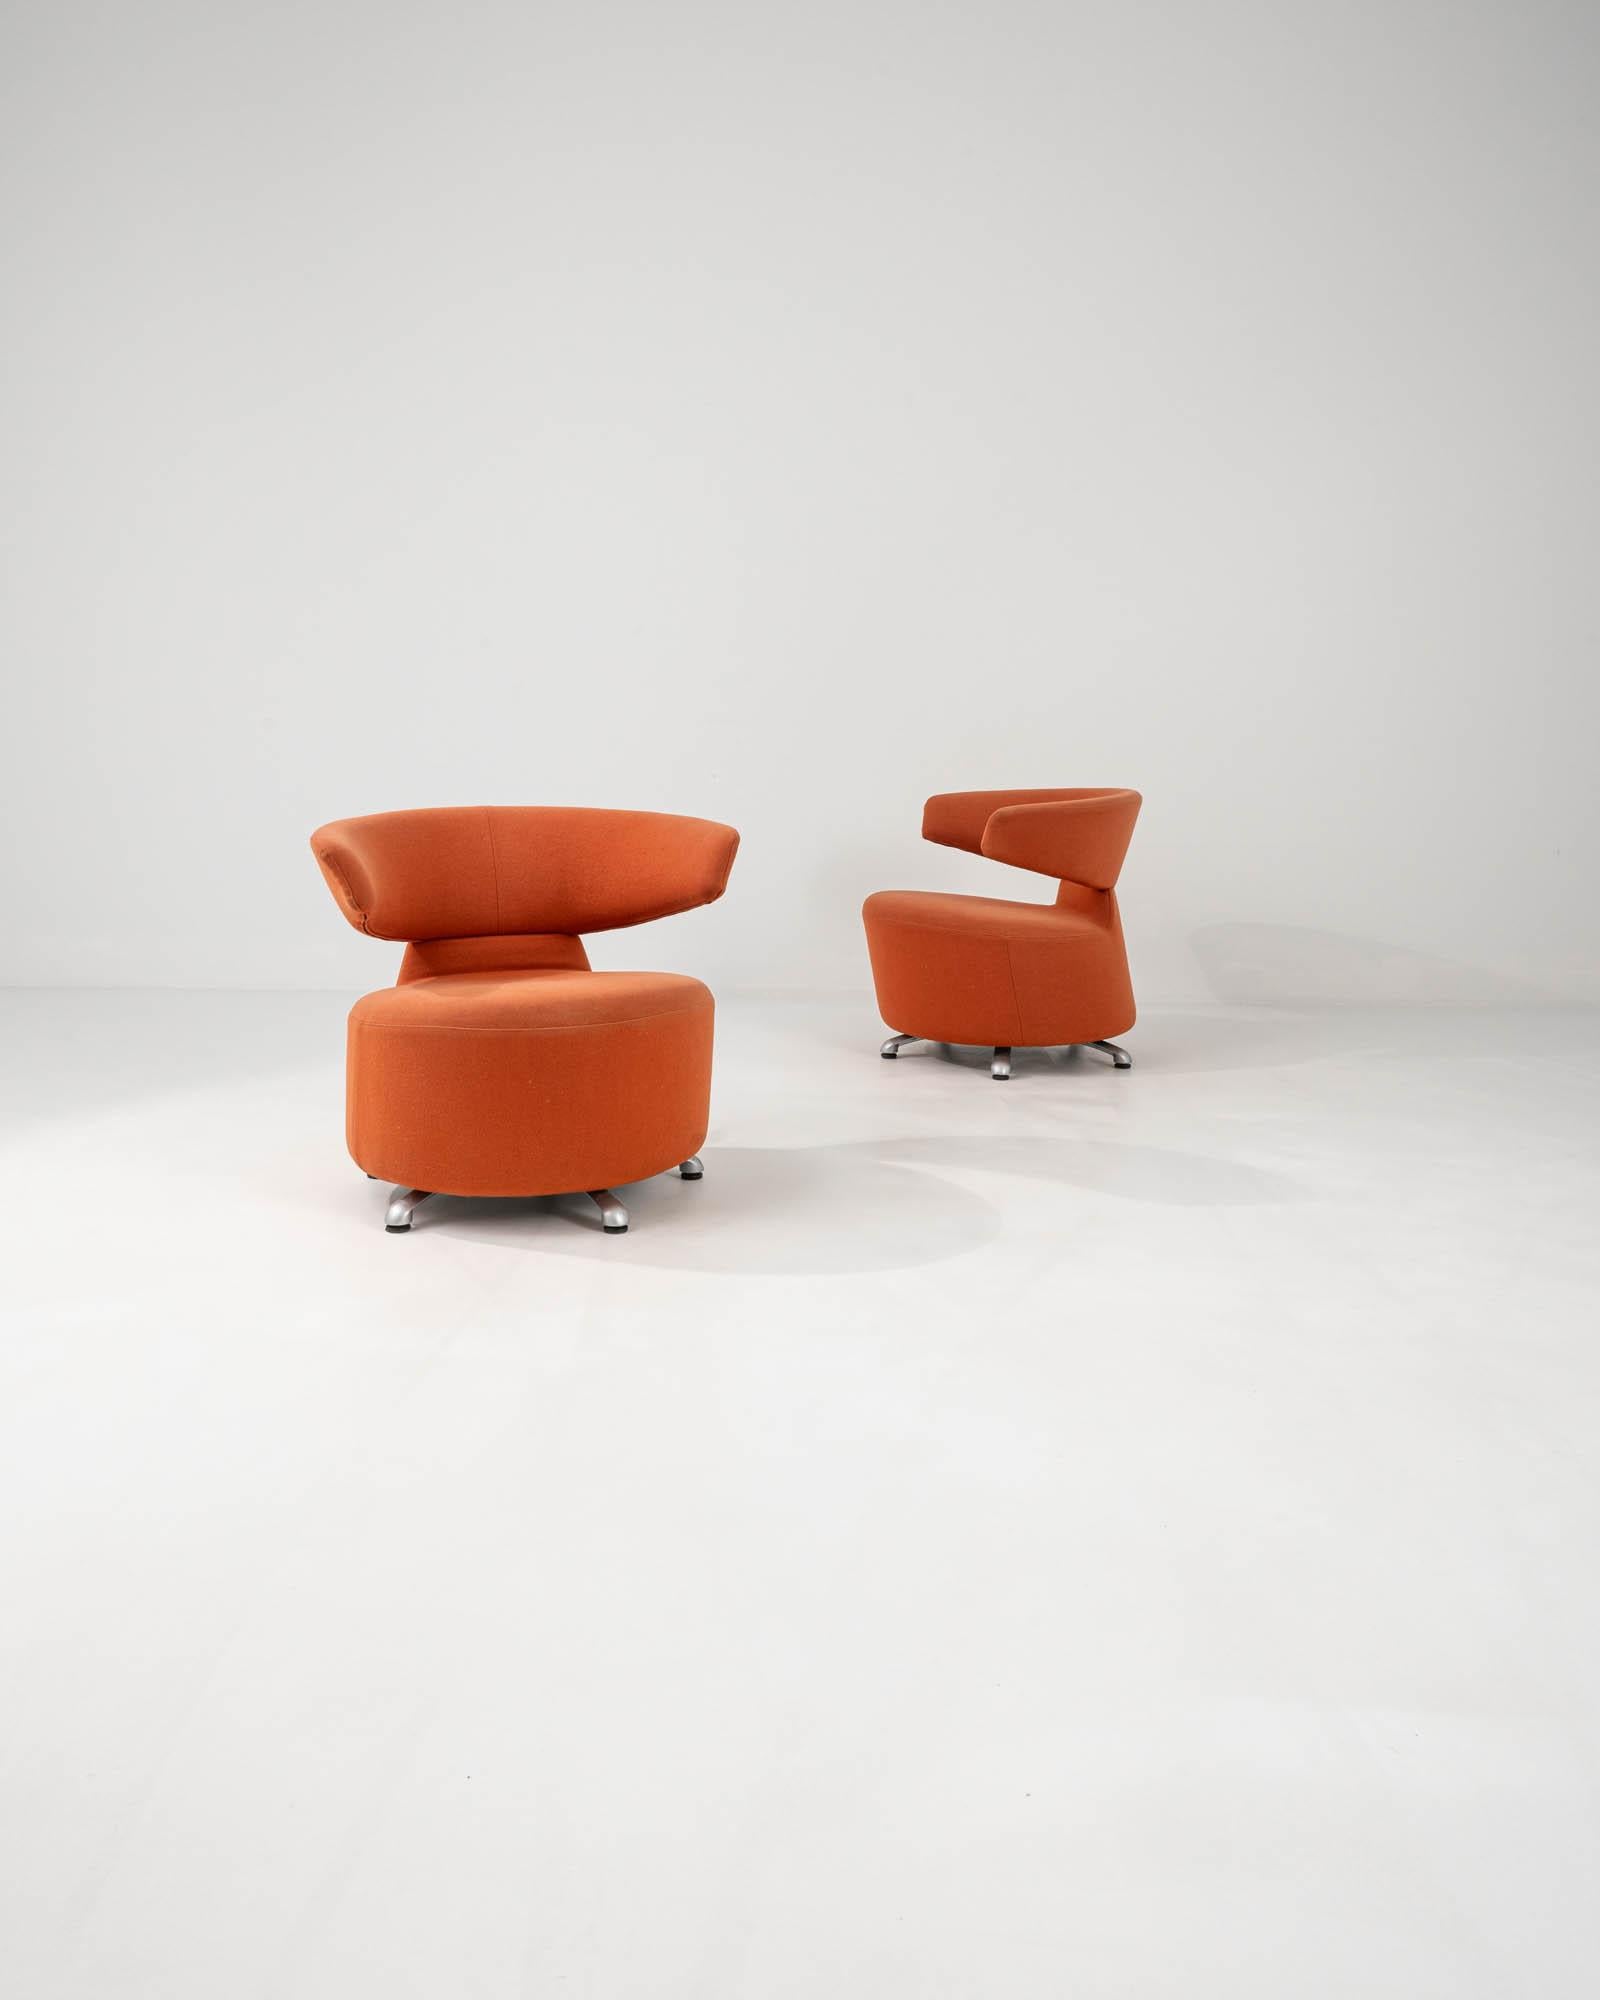 These upholstered lounge chairs were made in Italy in the 20th Century. The swiveling motion fits to the sleek style and sense of movement which define these colorful chairs. Upholstered in a sunset orange hue, the vibrant color enhances the